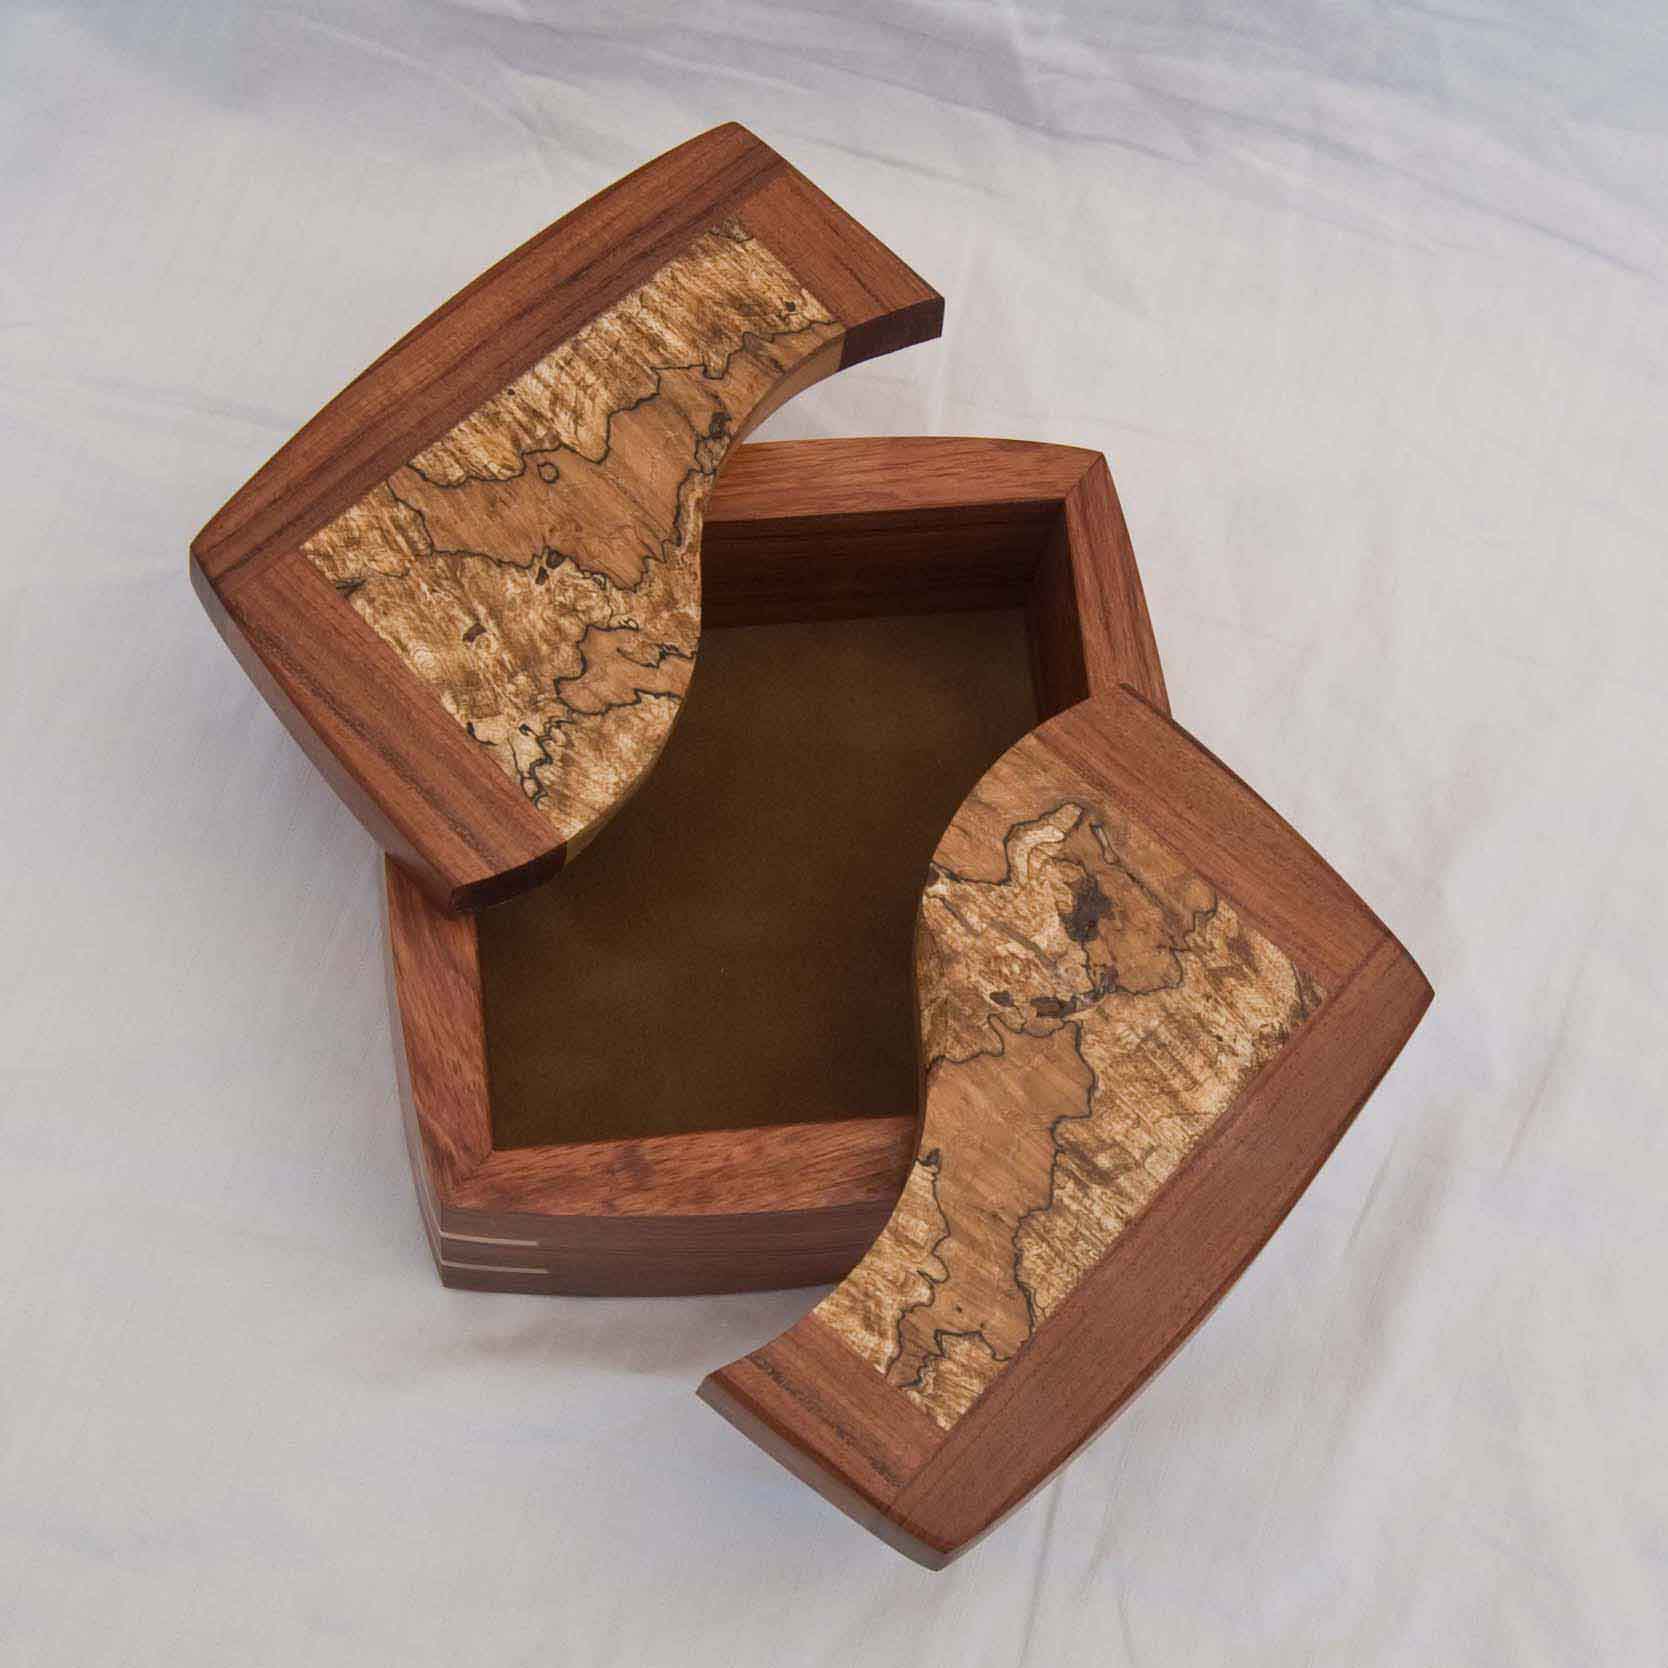 Decorative Trinket Boxes Handcrafted of Exotic Woods